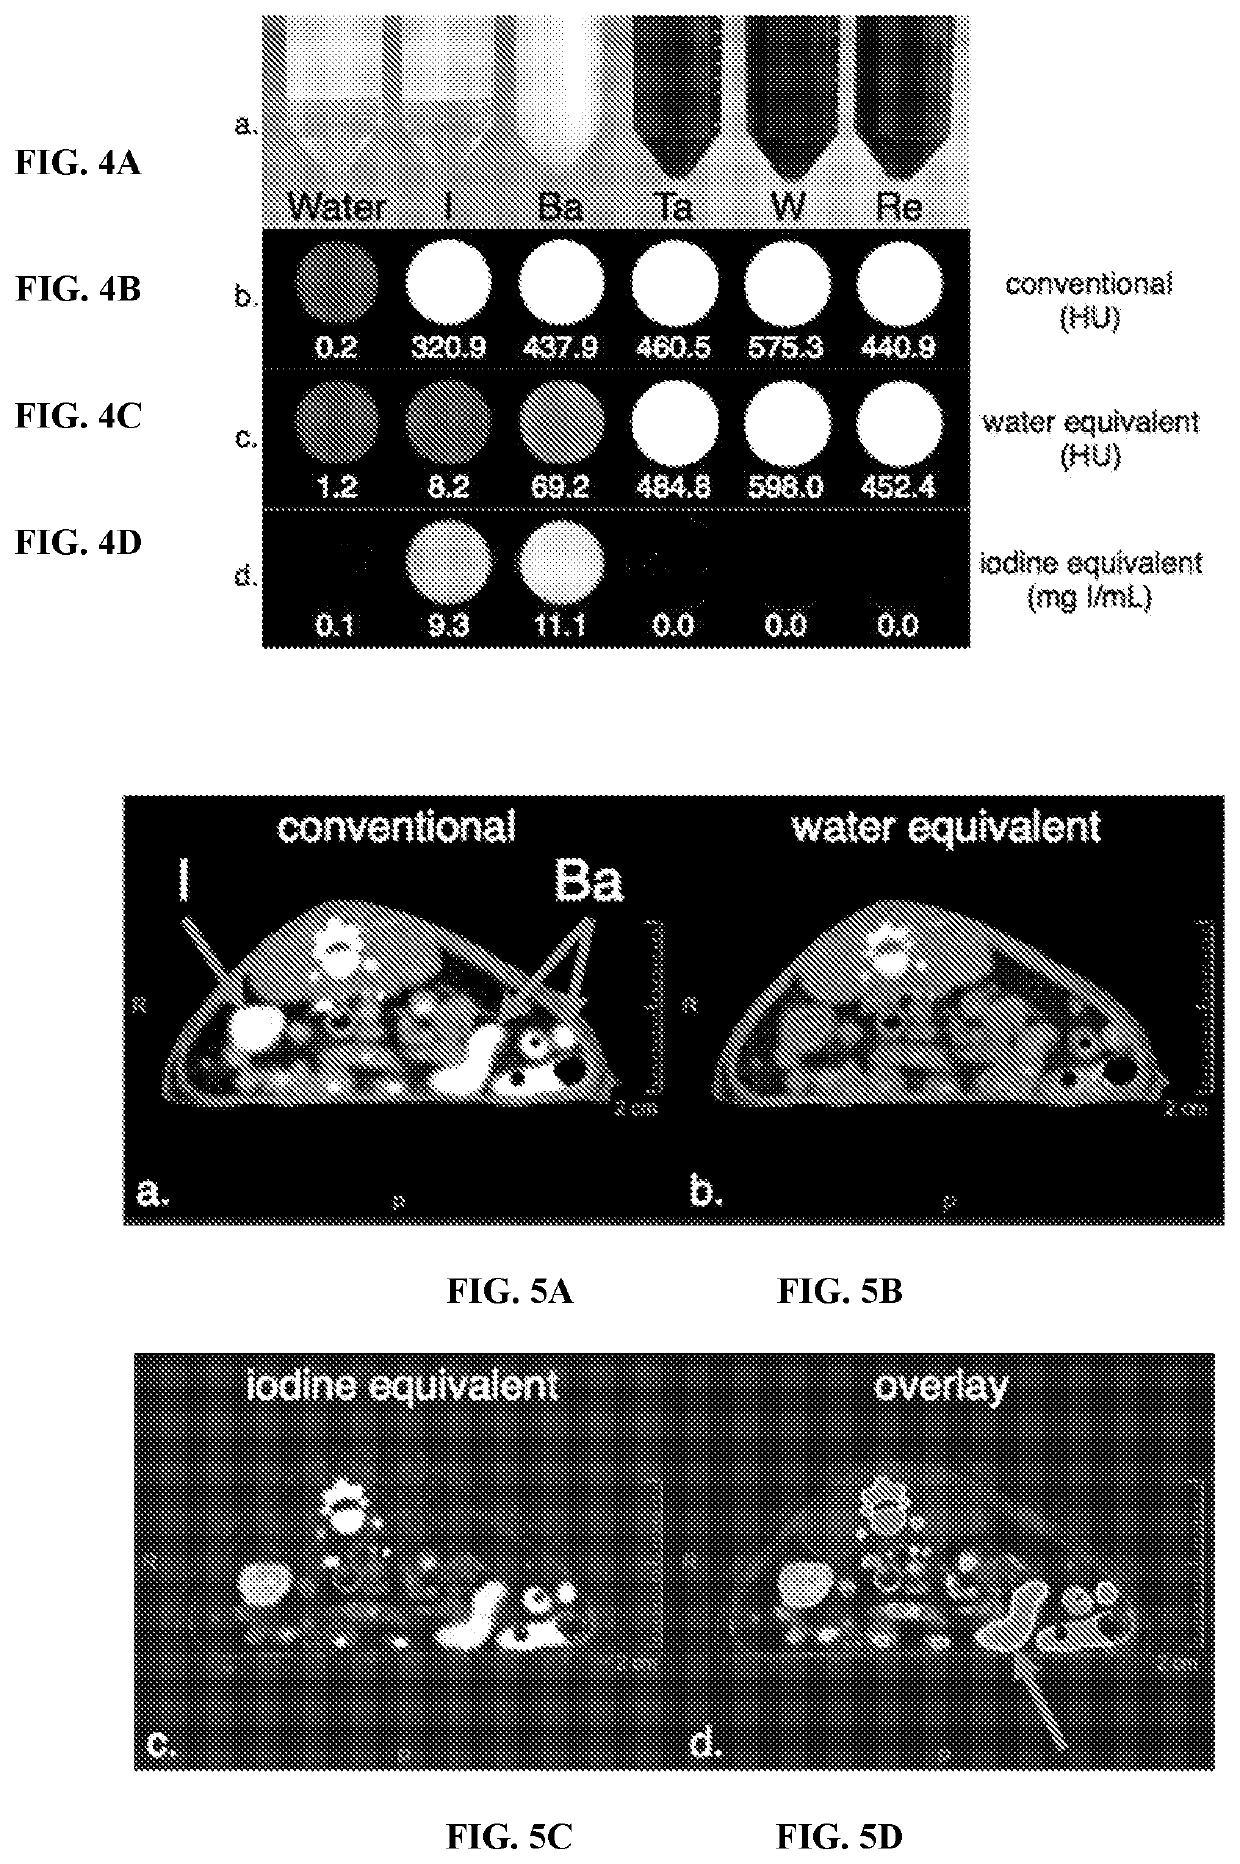 Contrast Agents and Methods of Making the Same for Spectral CT That Exhibit Cloaking and Auto-Segmentation